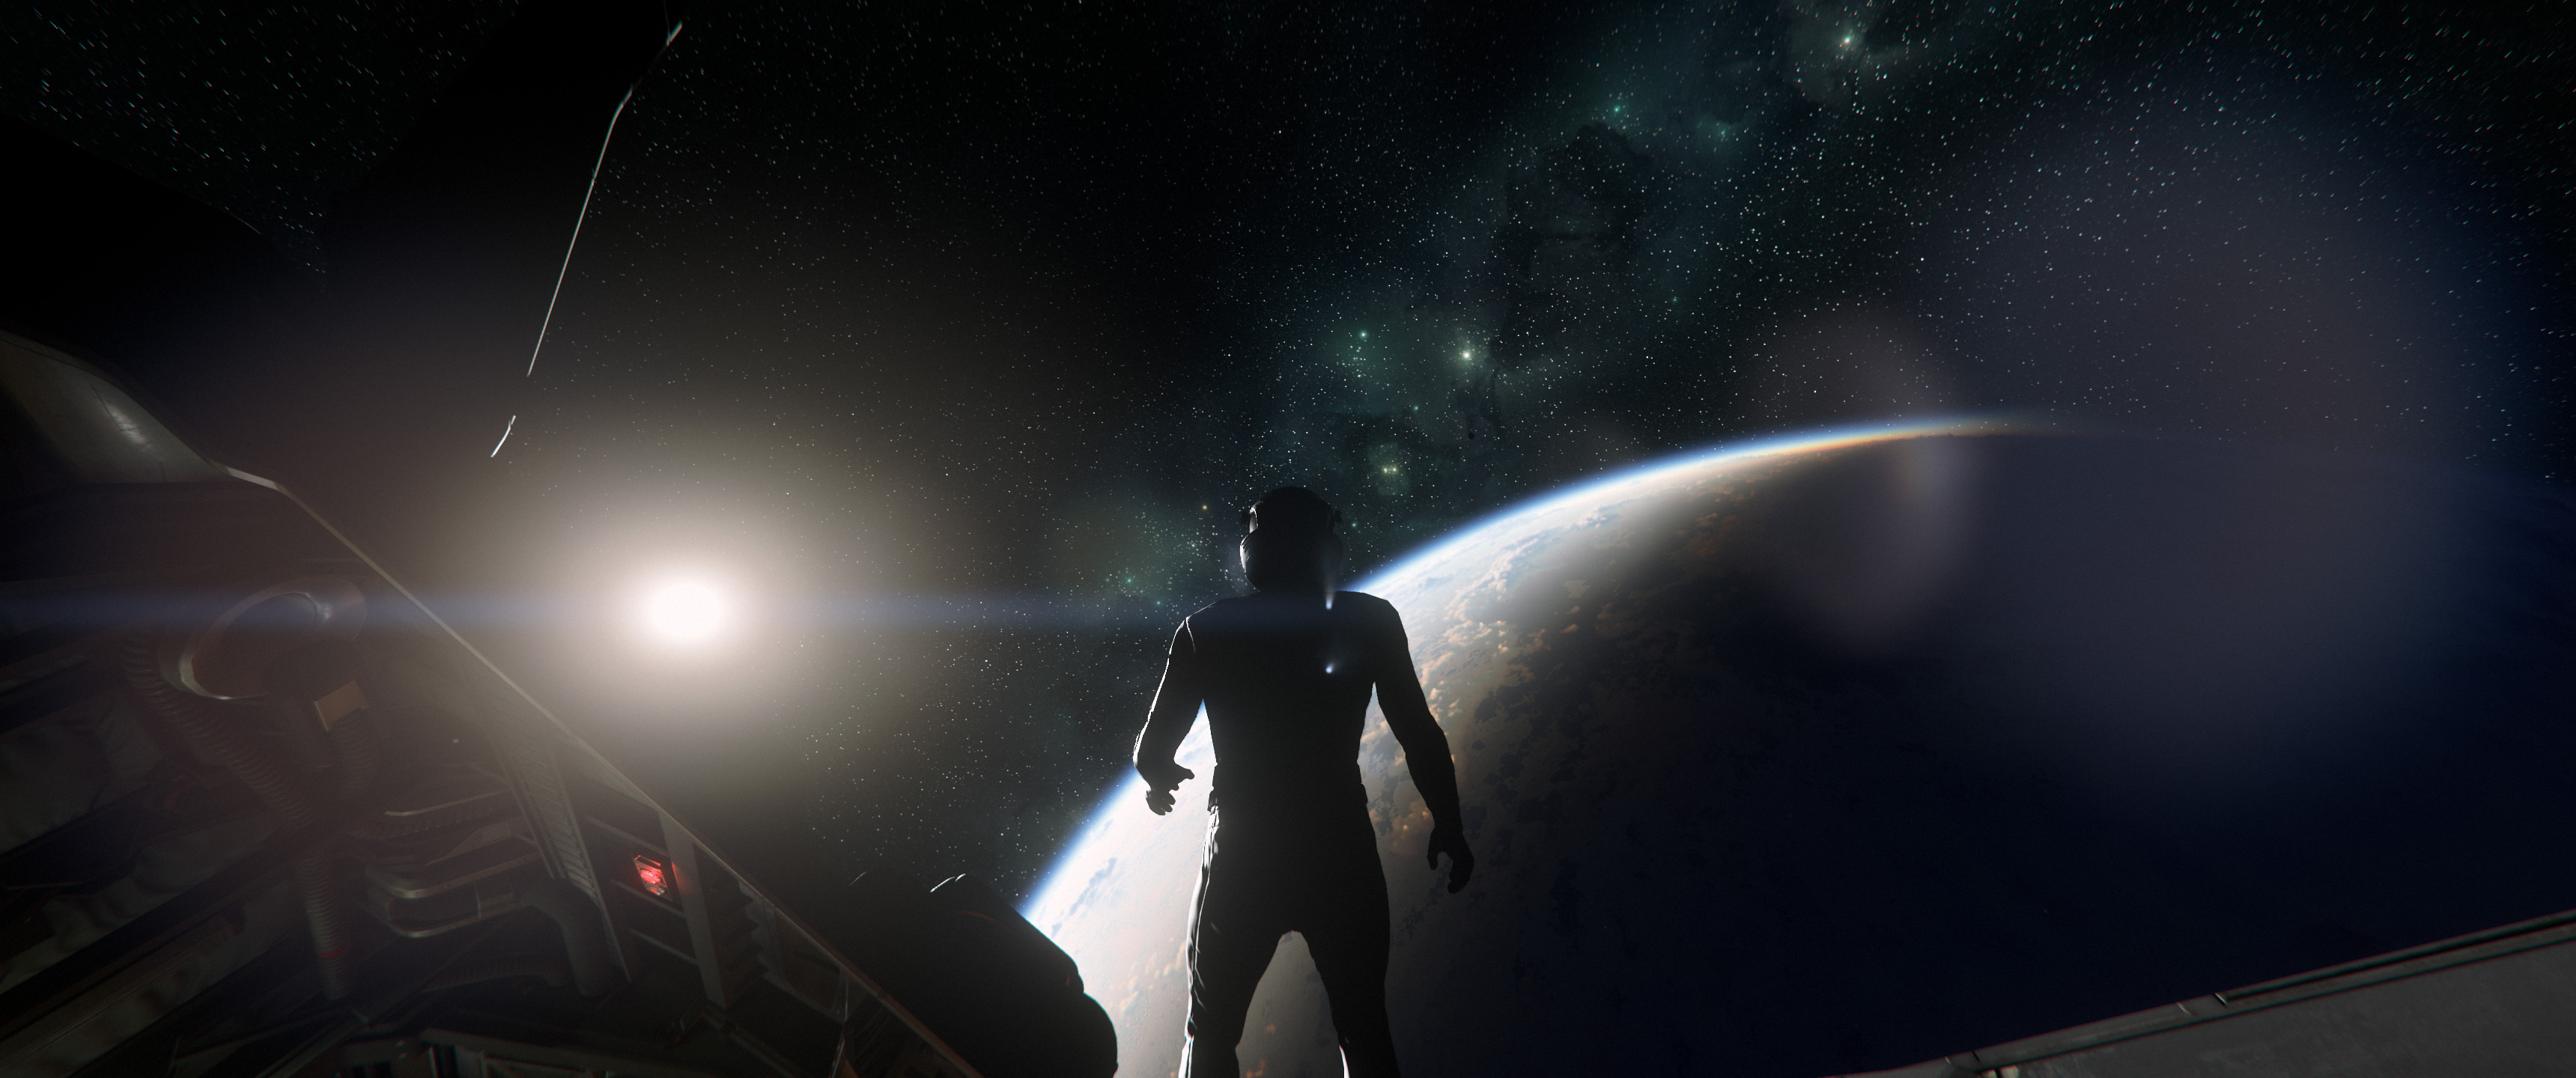 Sunlit silhoutte of a person in a thin spacesuit, back to us, stepping out of a small ship and firing EVA thrusters with a side-lit planet in the distance